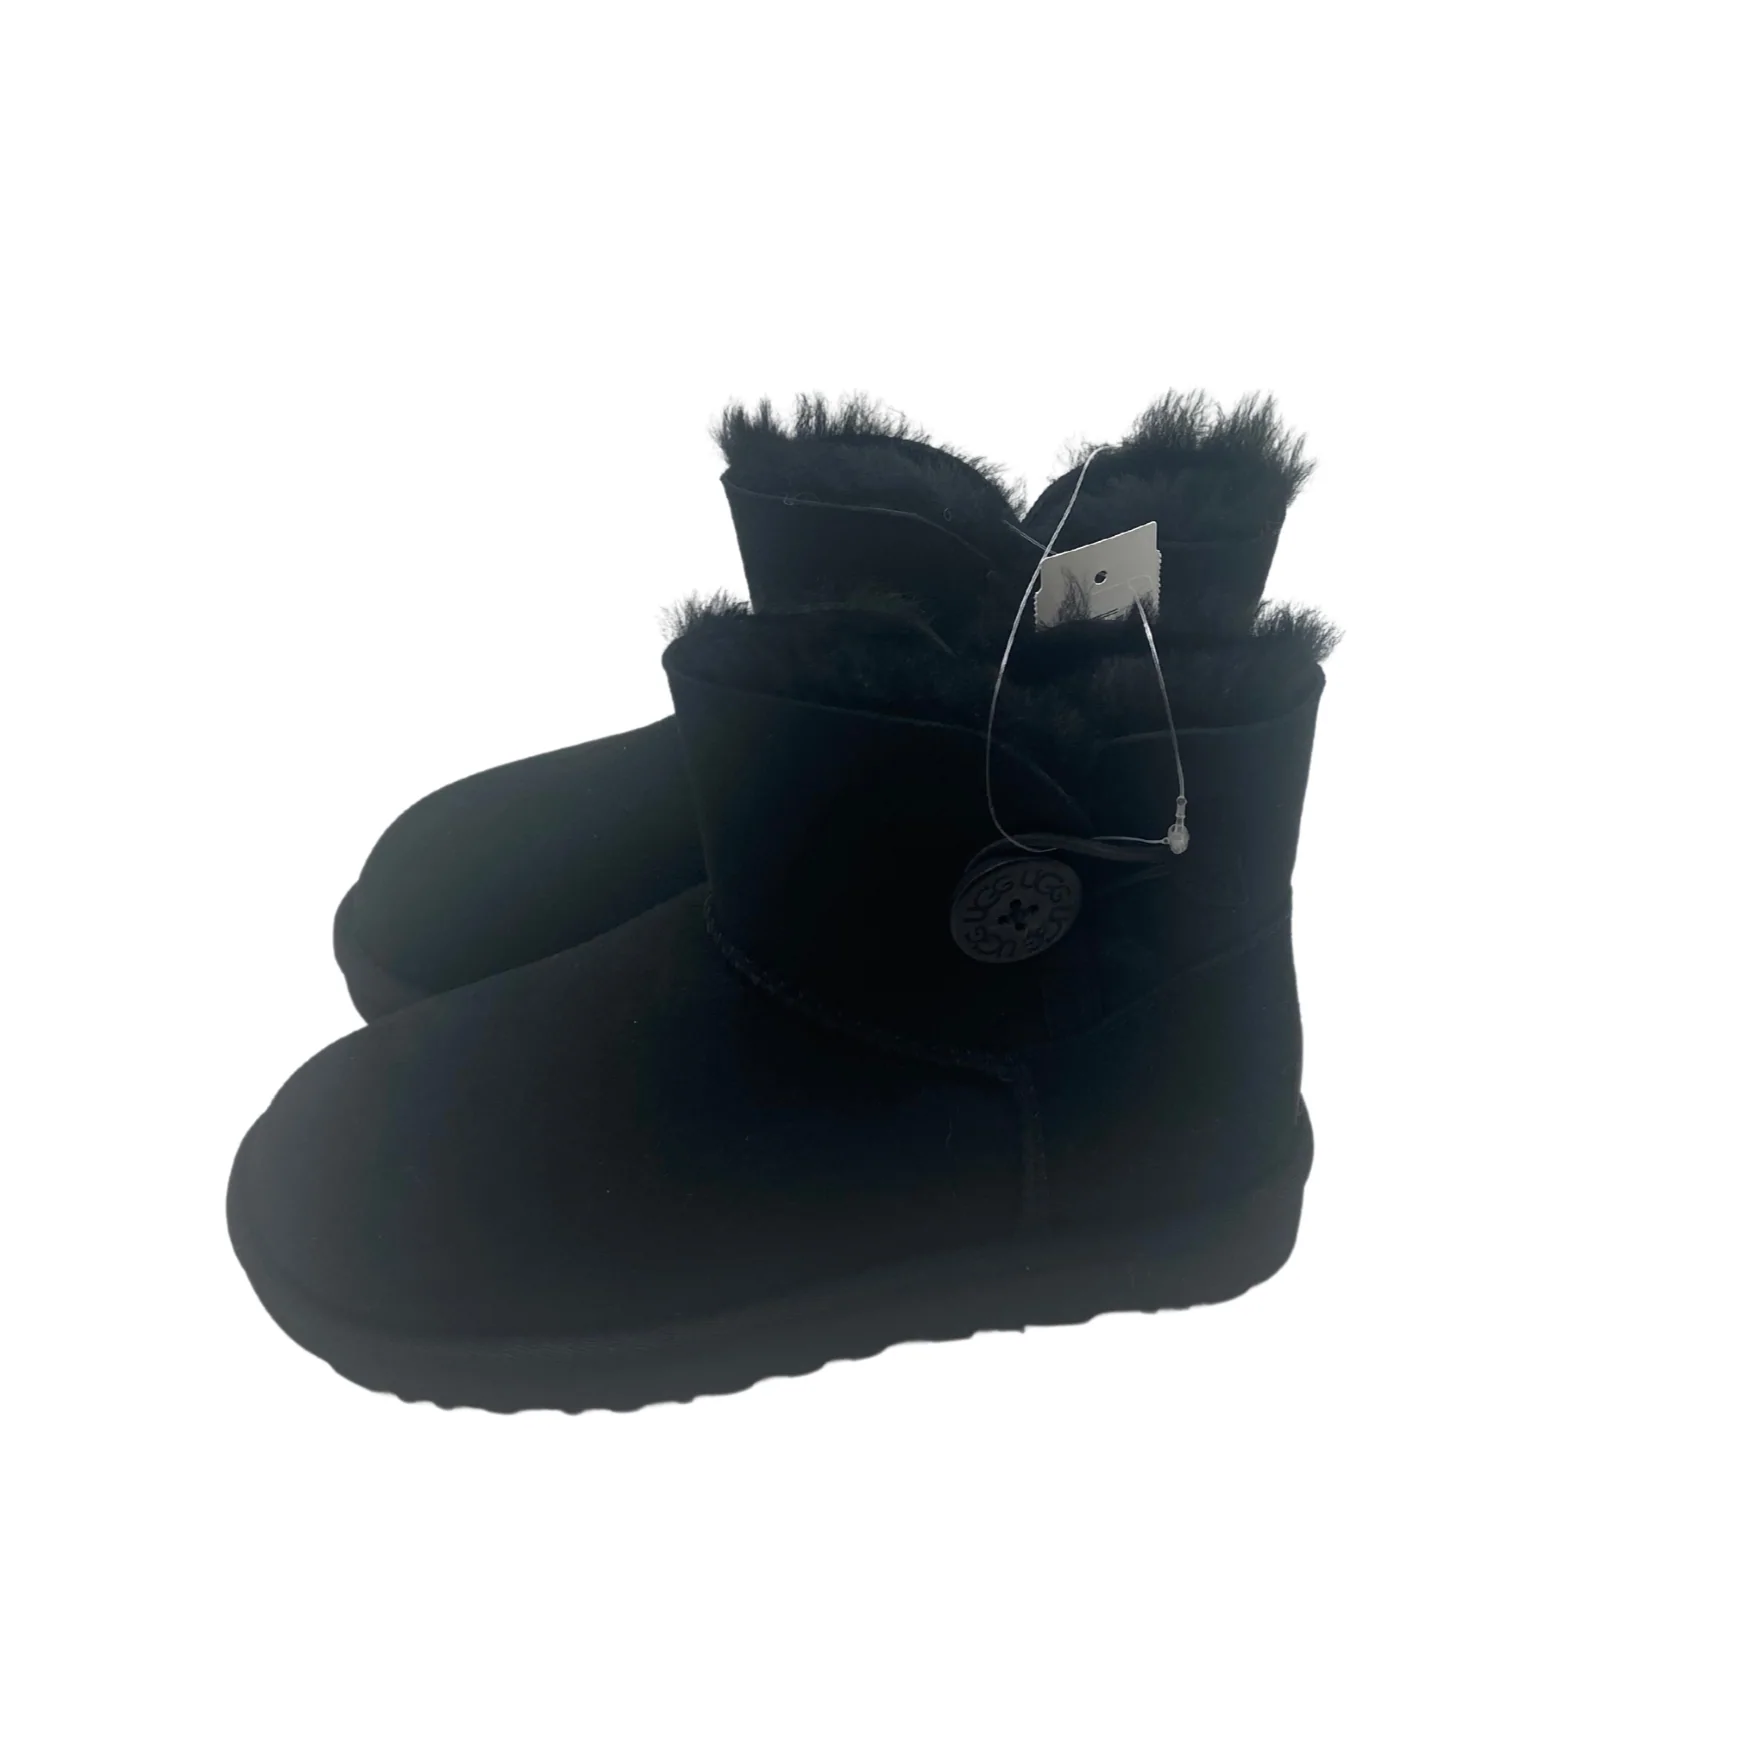 Ugg: Women's Boots / Winter Boots / Mini Bailey Button II / Black / Size 6